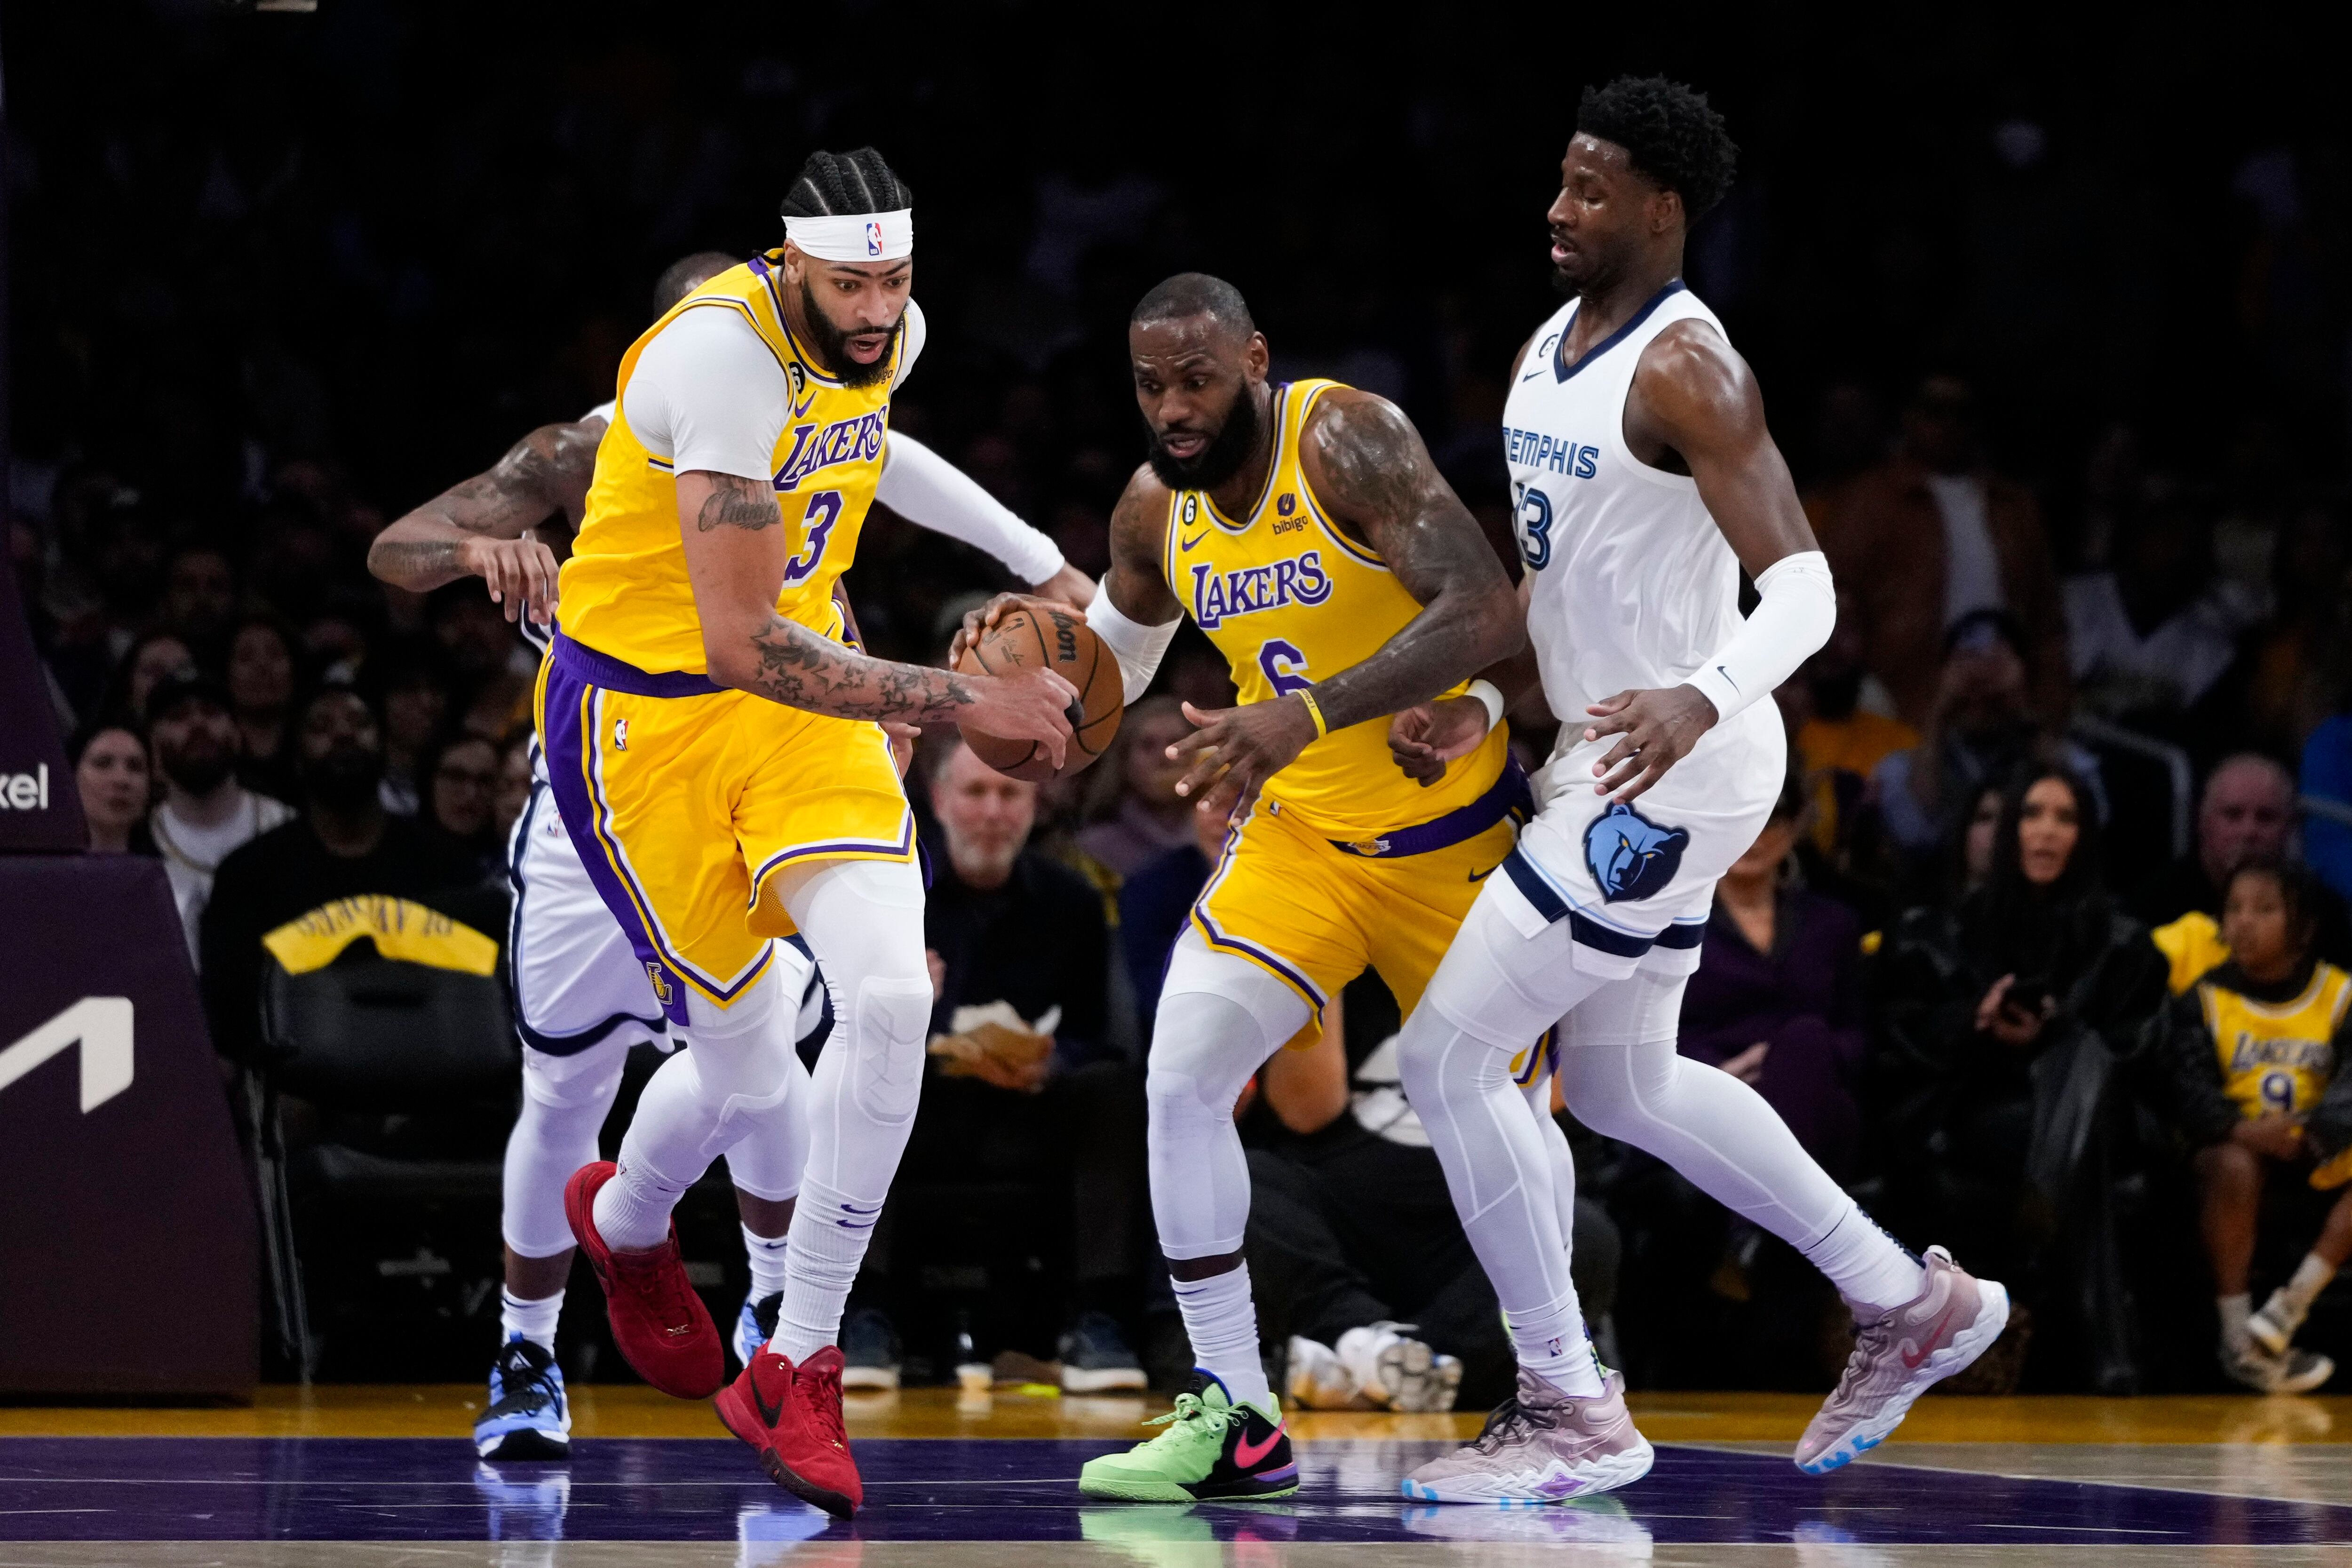 Lakers 119, Wizards 117 - LeBron's 4th straight 30-point game carries Lakers  to win 